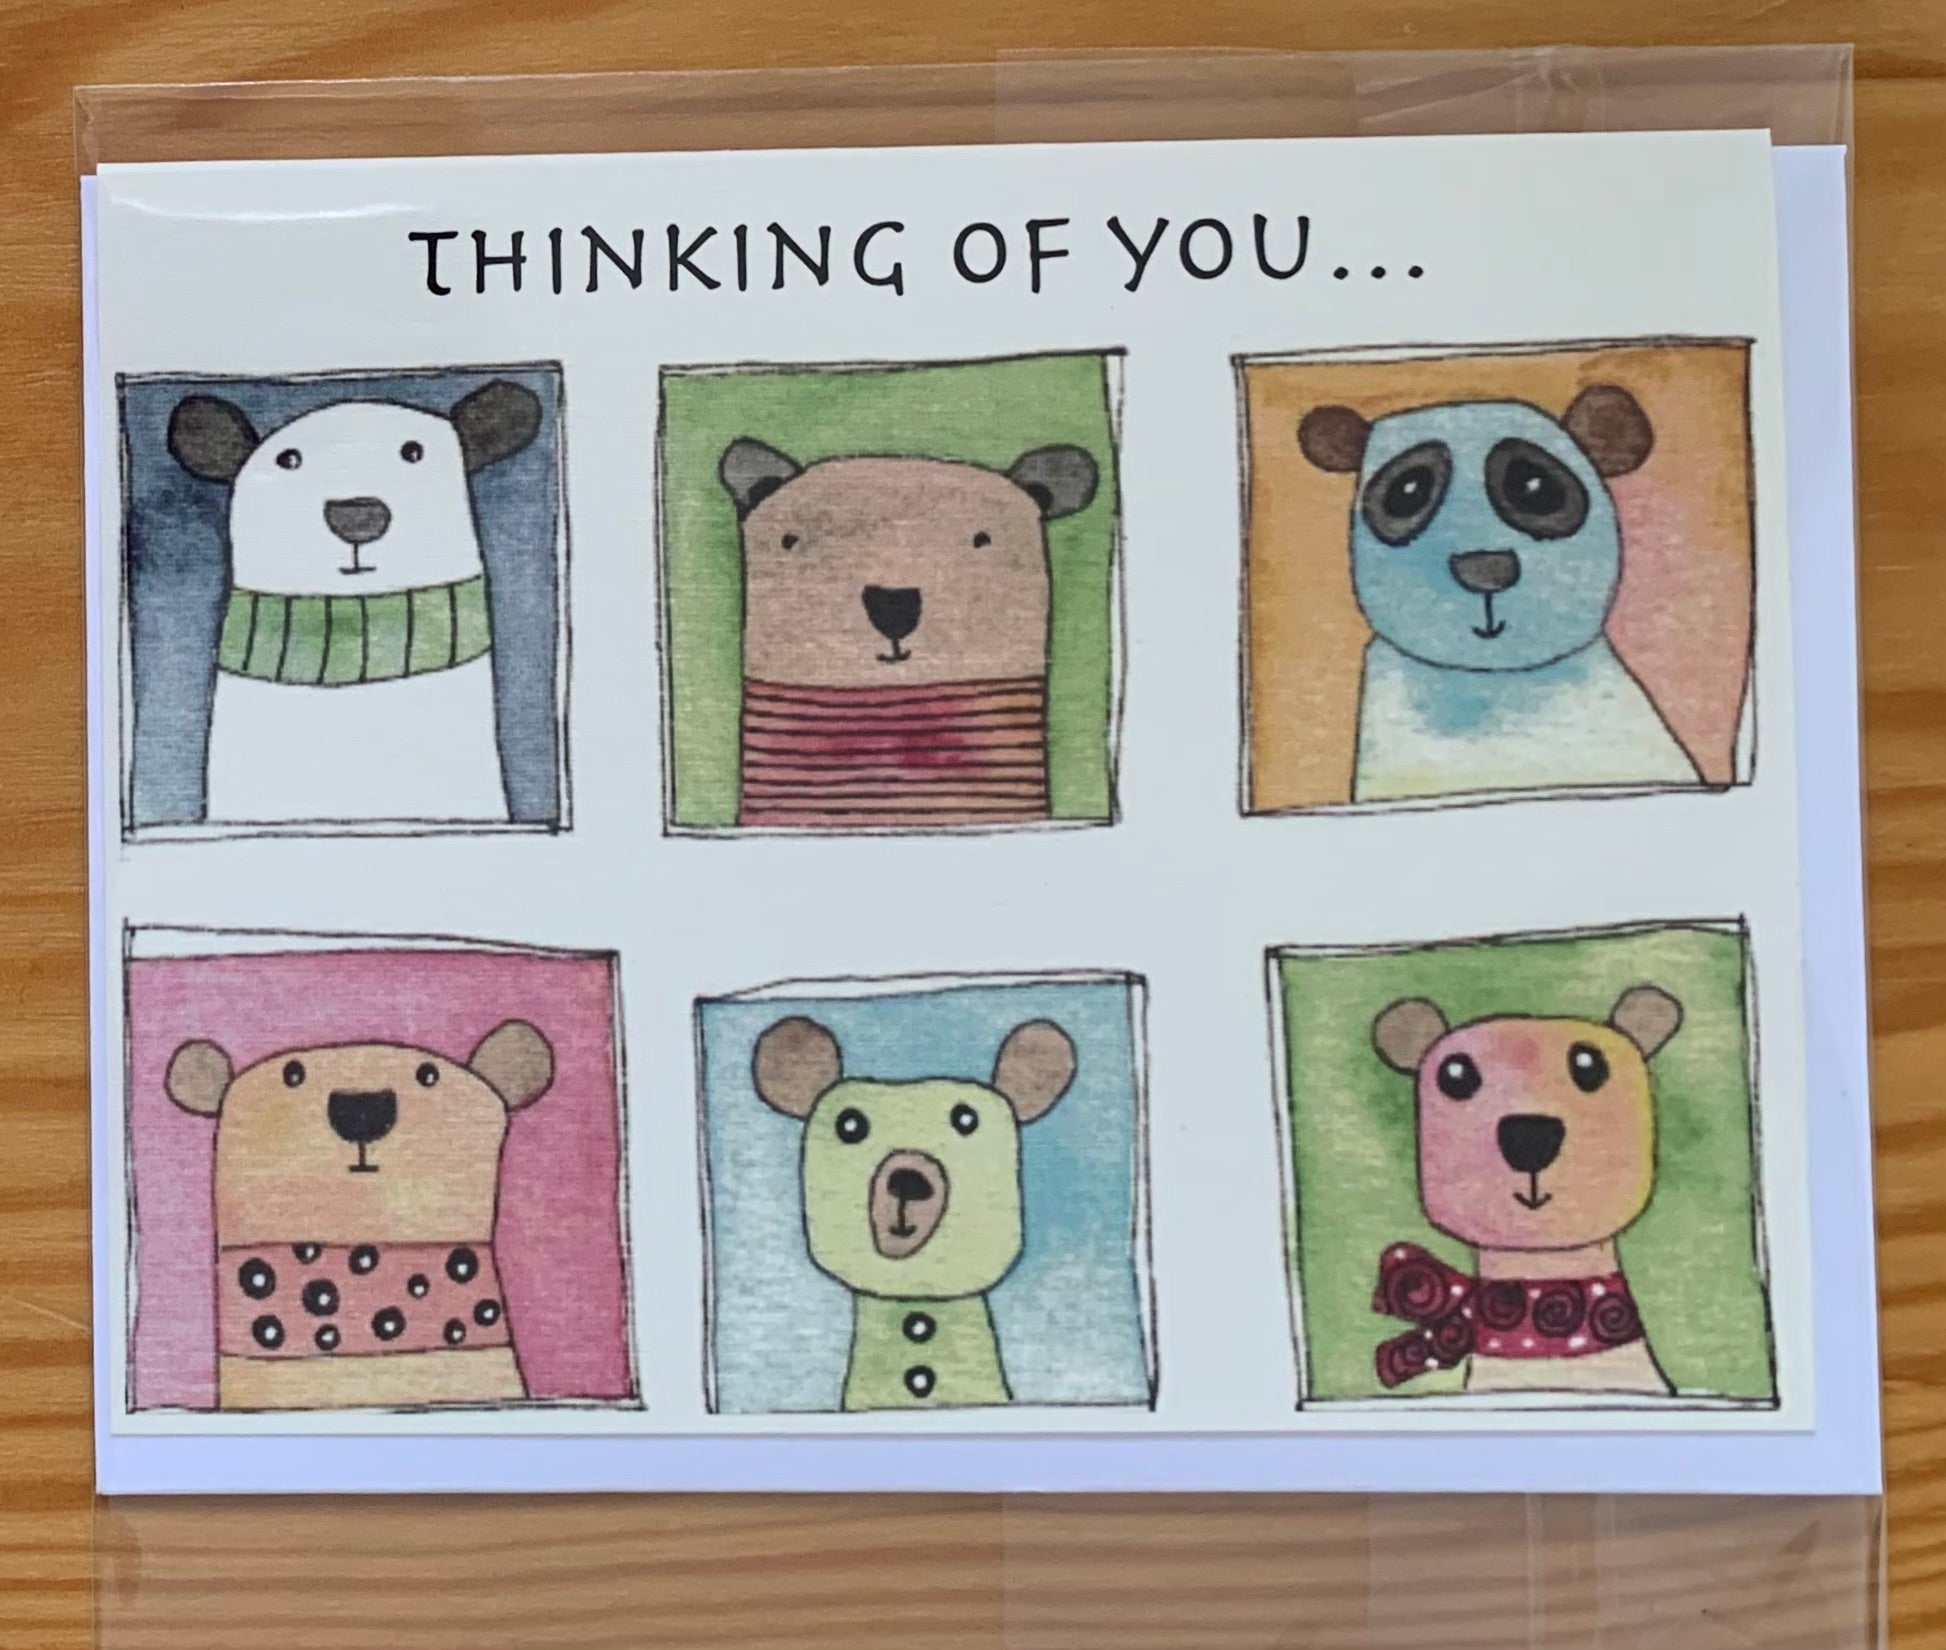 "Thinking of you" bears greeting card